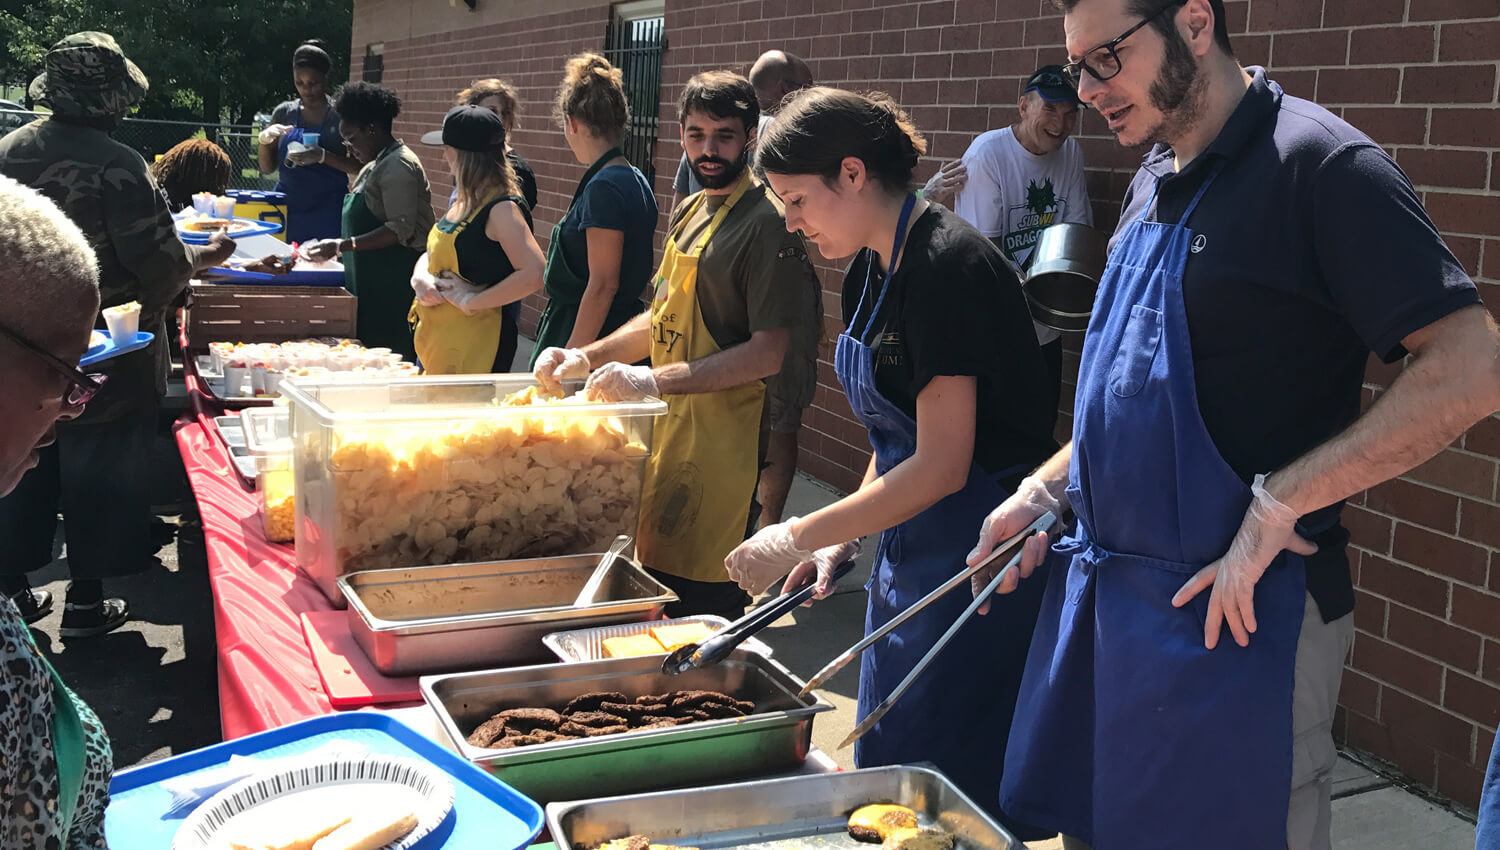 Students serving food to the homeless